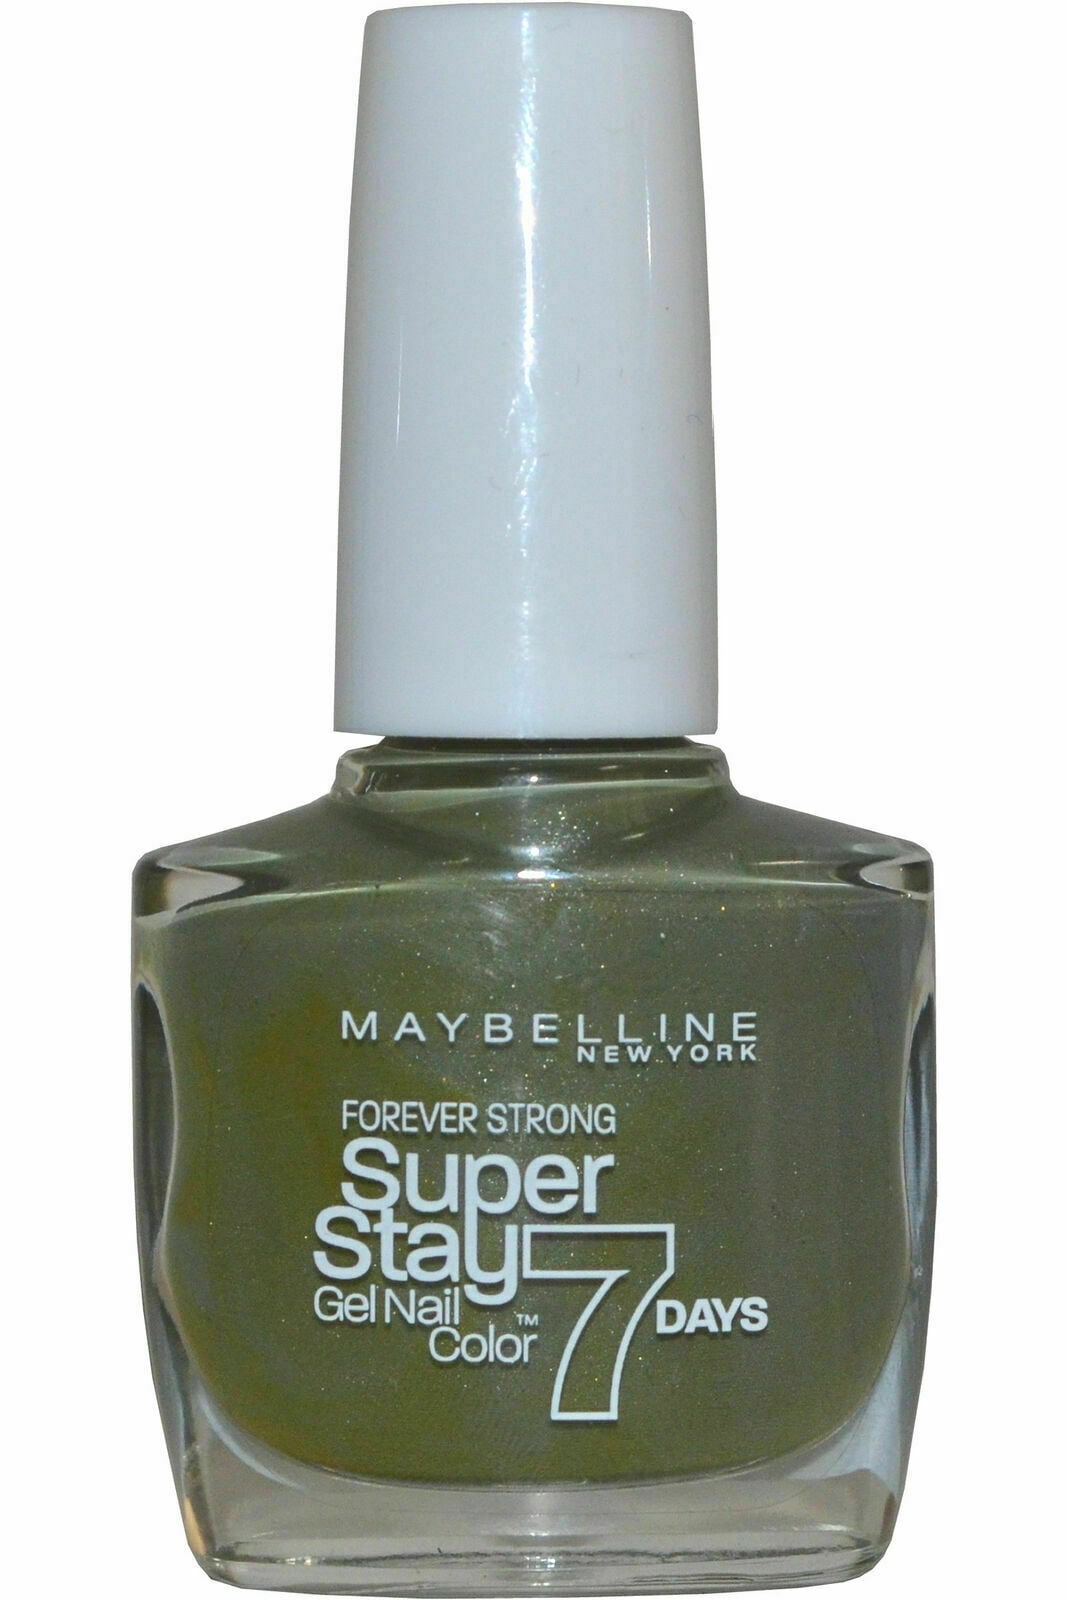 #620 Forever 7 Stay Forever Maybelline Nail Super GEL Strong Moss Polish Day